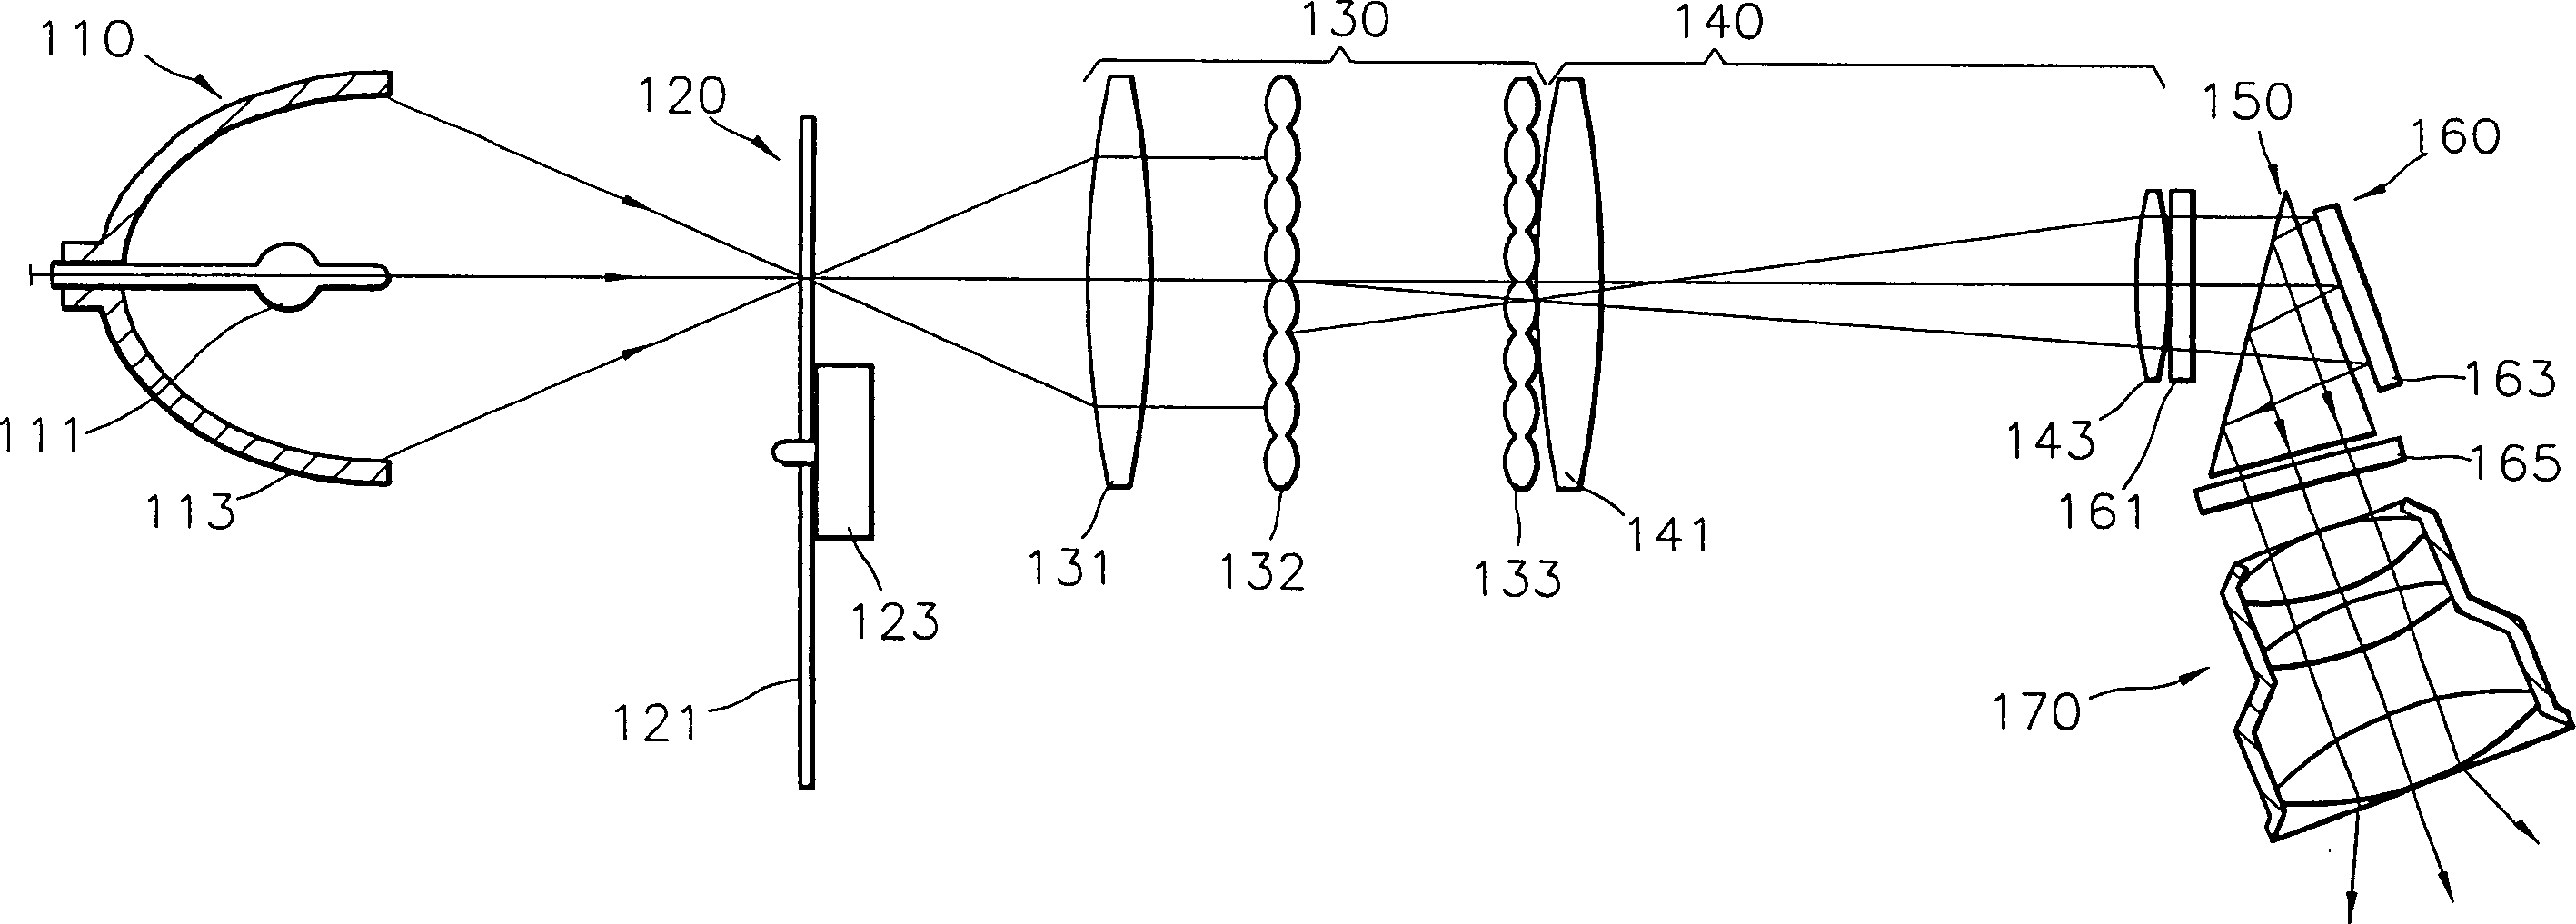 Reflective projecting apparatus